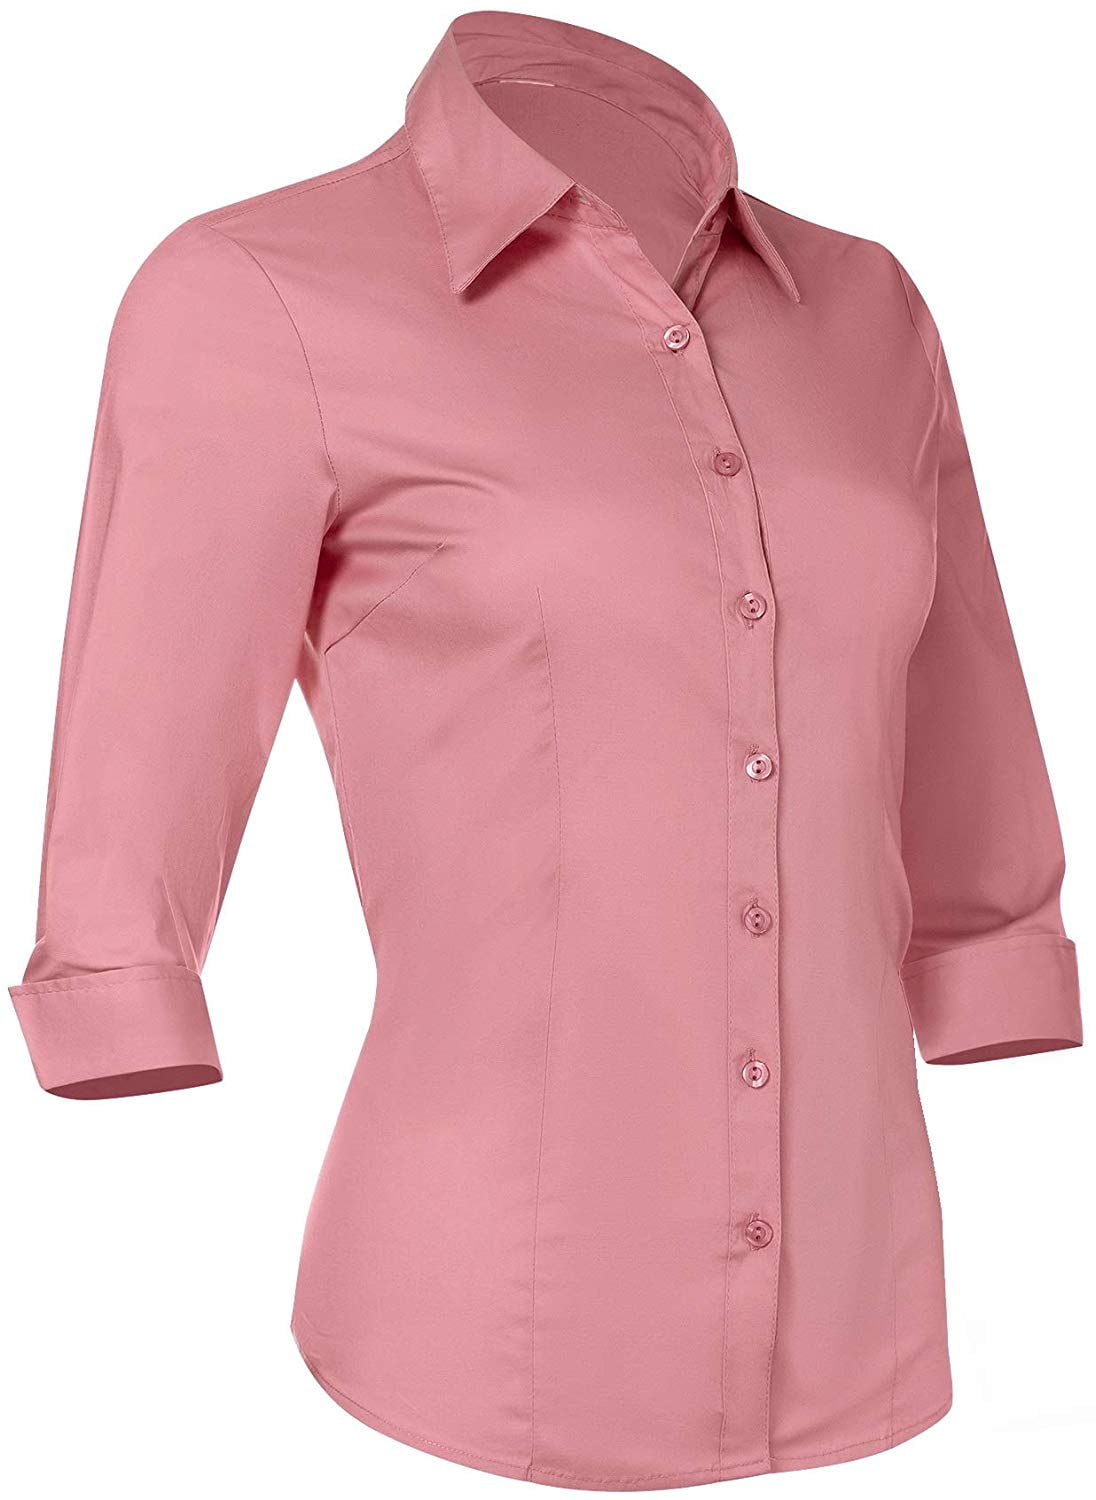 Button Down Shirts for Women 3 4 Sleeve ...